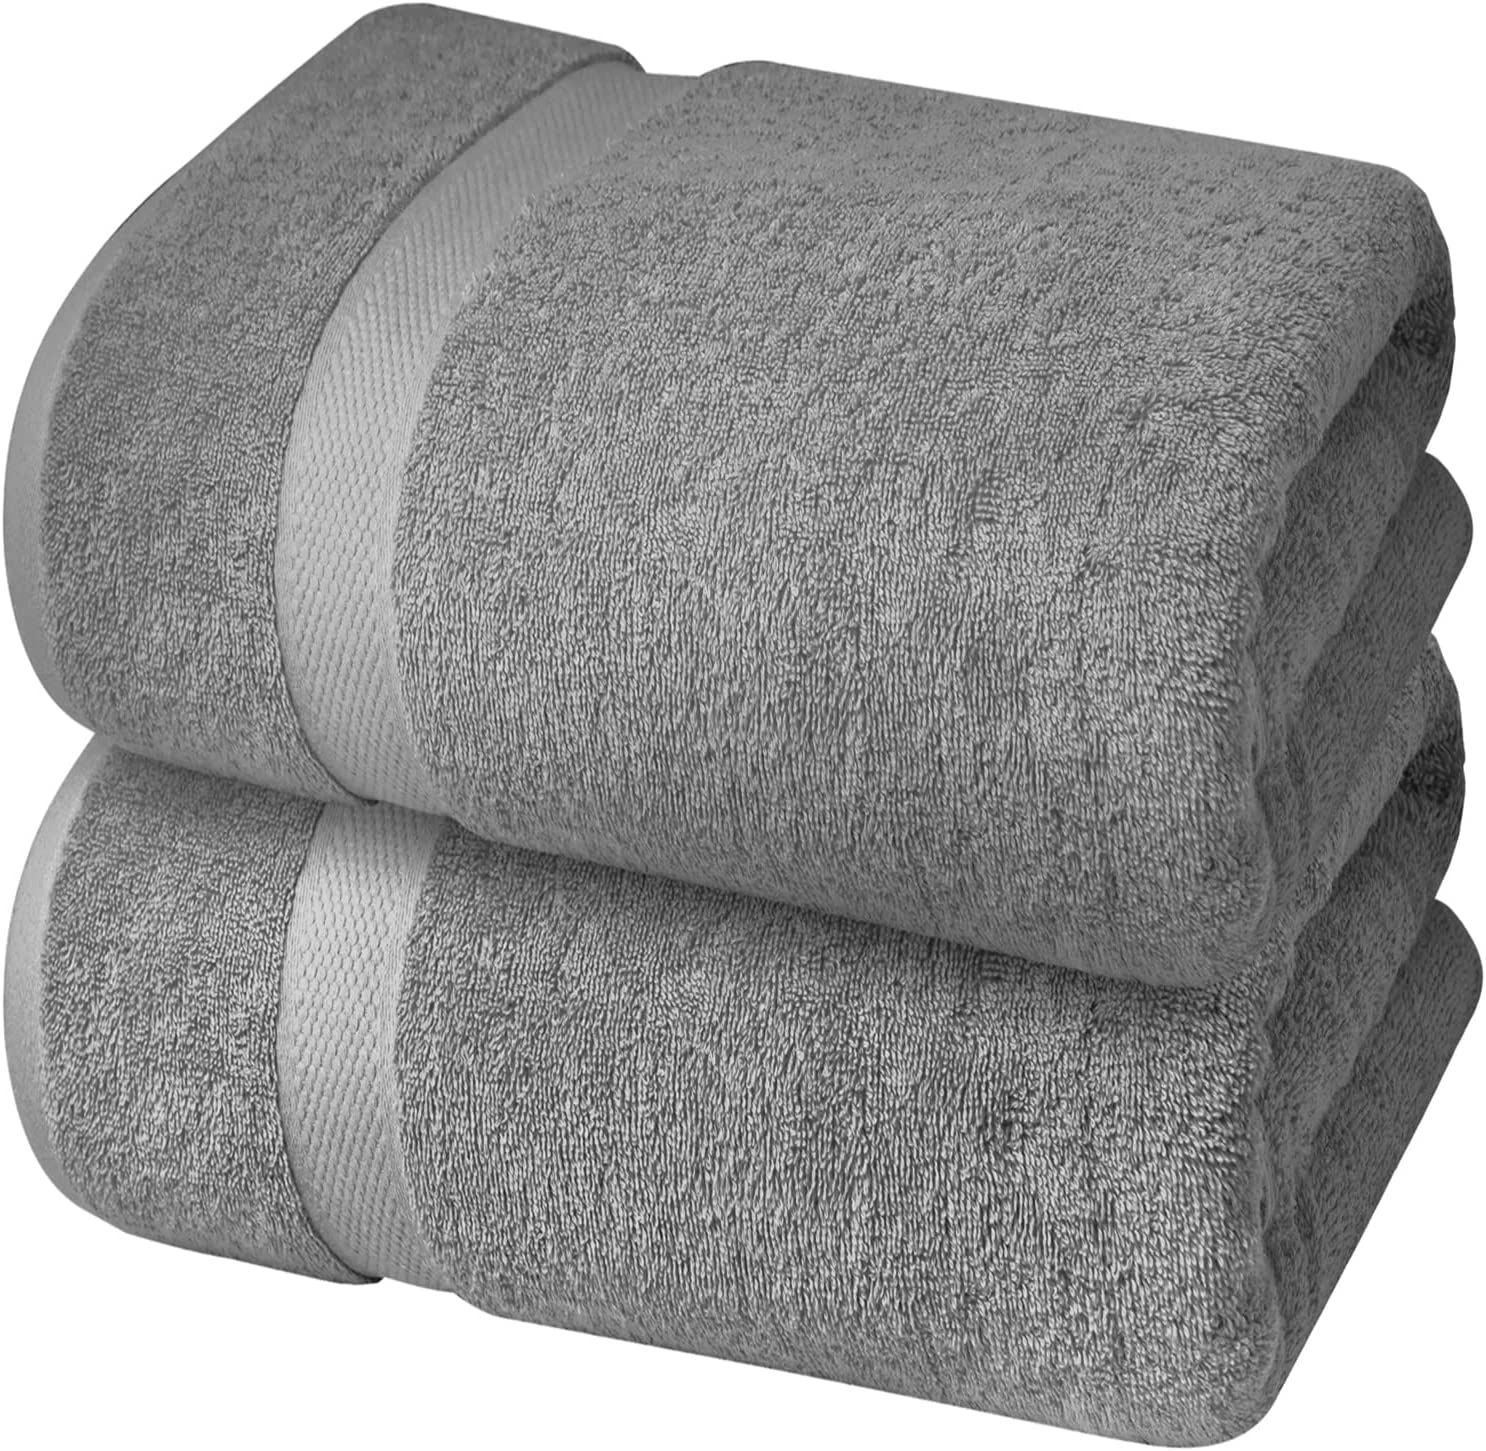 Luxury Bath Sheet Towels Extra Large 35x70 inch | 2 Pack Grey Size: 35 x 70 Gray